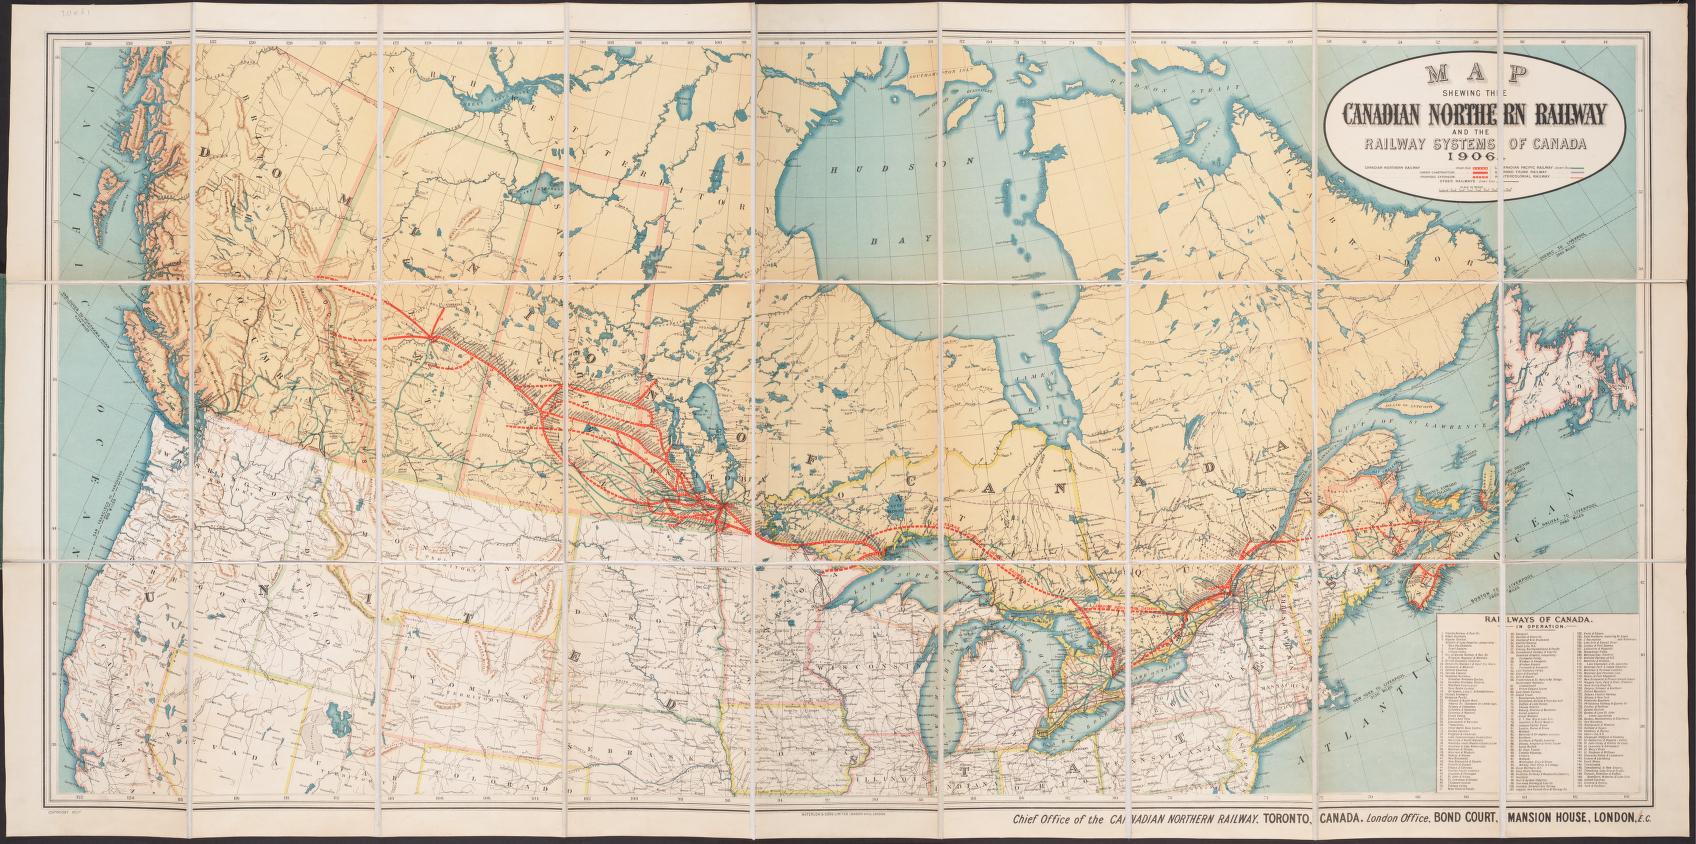 Map shewing the Canadian Northern Railway and the railway systems of Canada, 1906